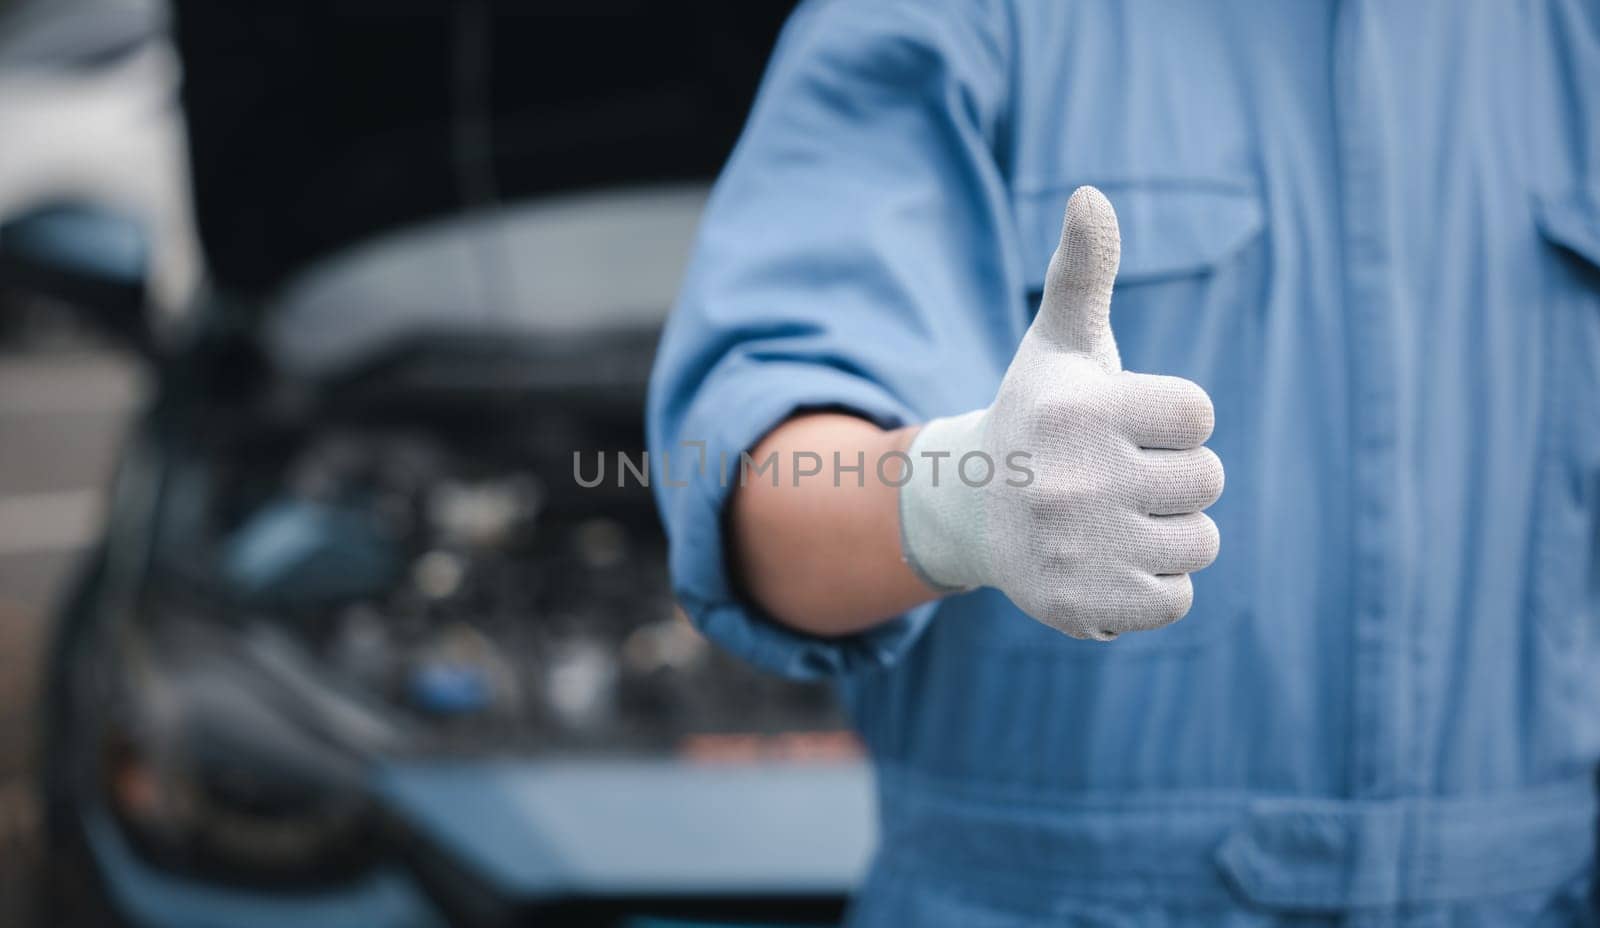 Asian mechanic smiles showing thumbs up while repairing a car. Skilled technician's expertise in vehicle maintenance ensures quality service and safety in the garage. by Sorapop